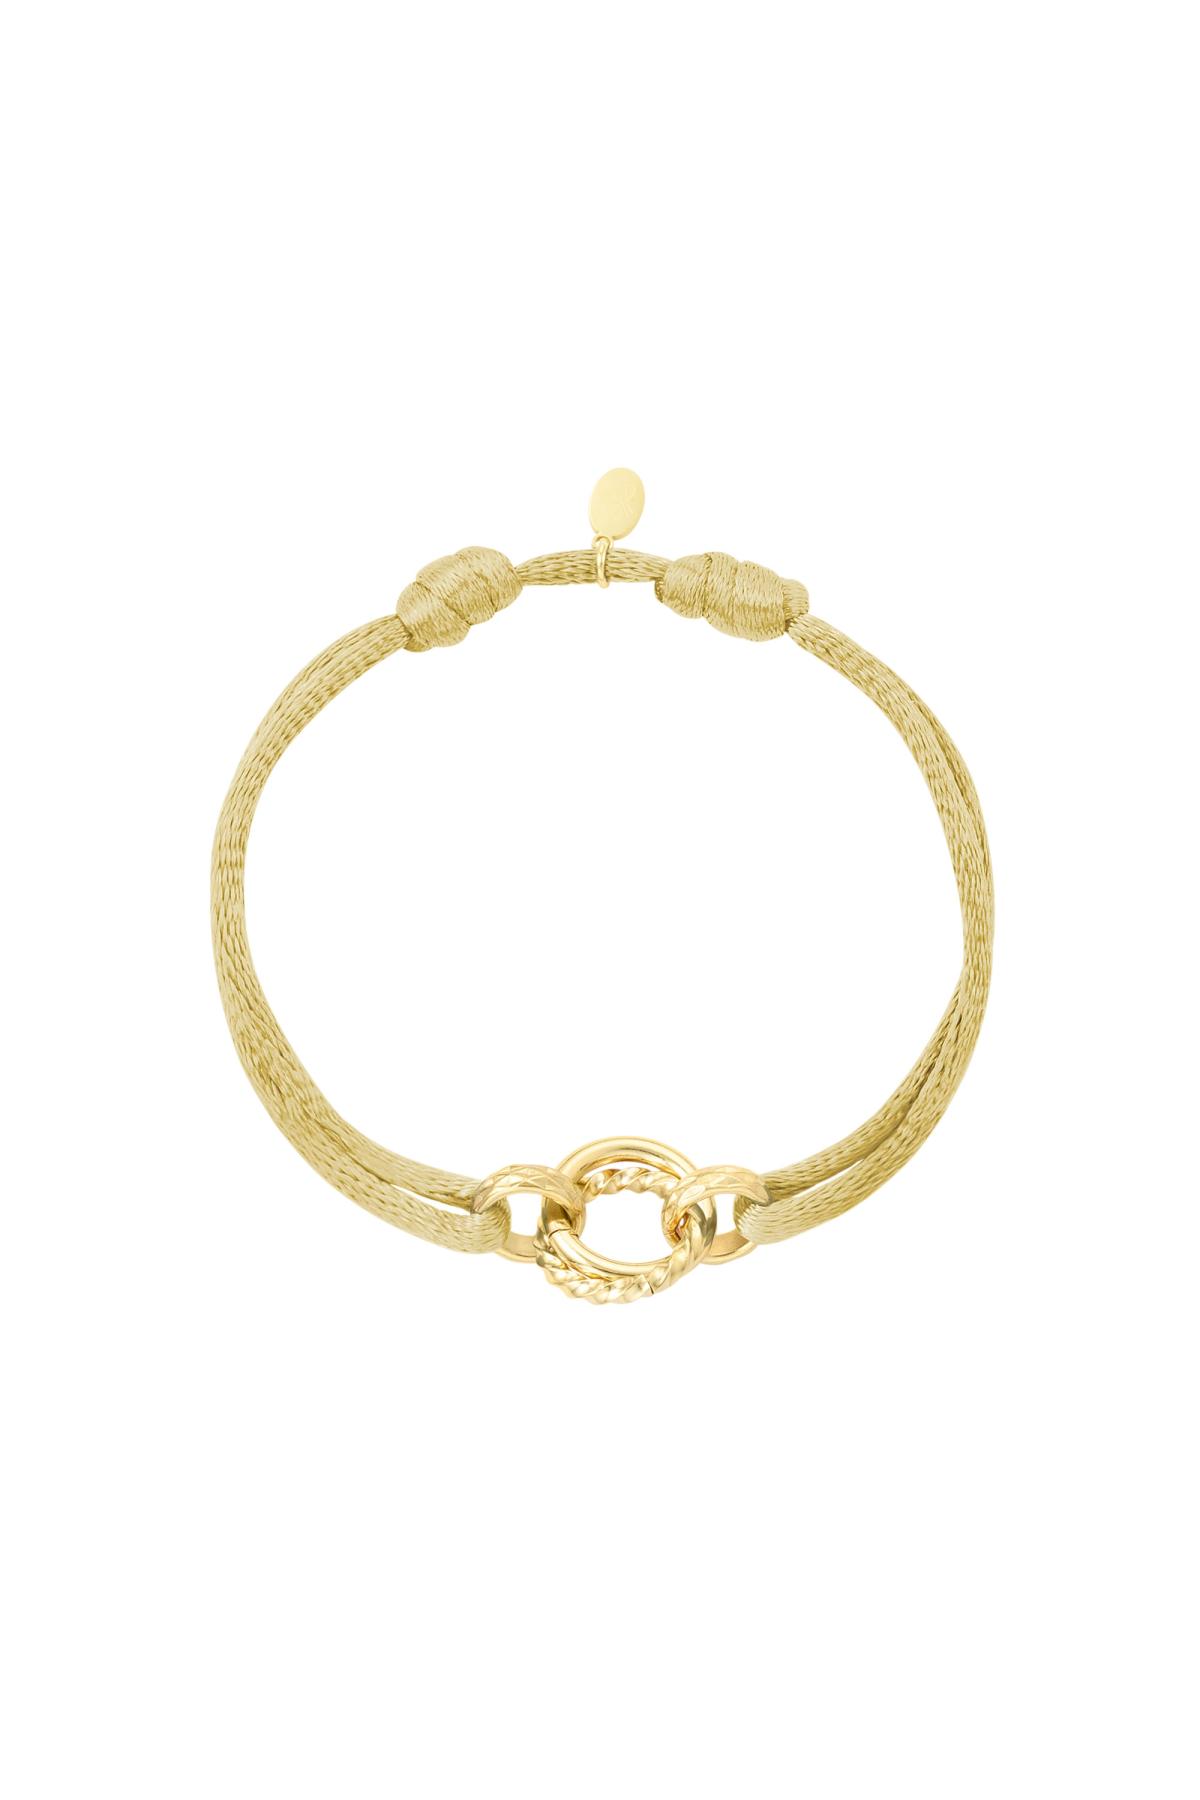 Fabric bracelet circle Beige & Gold Stainless Steel h5 